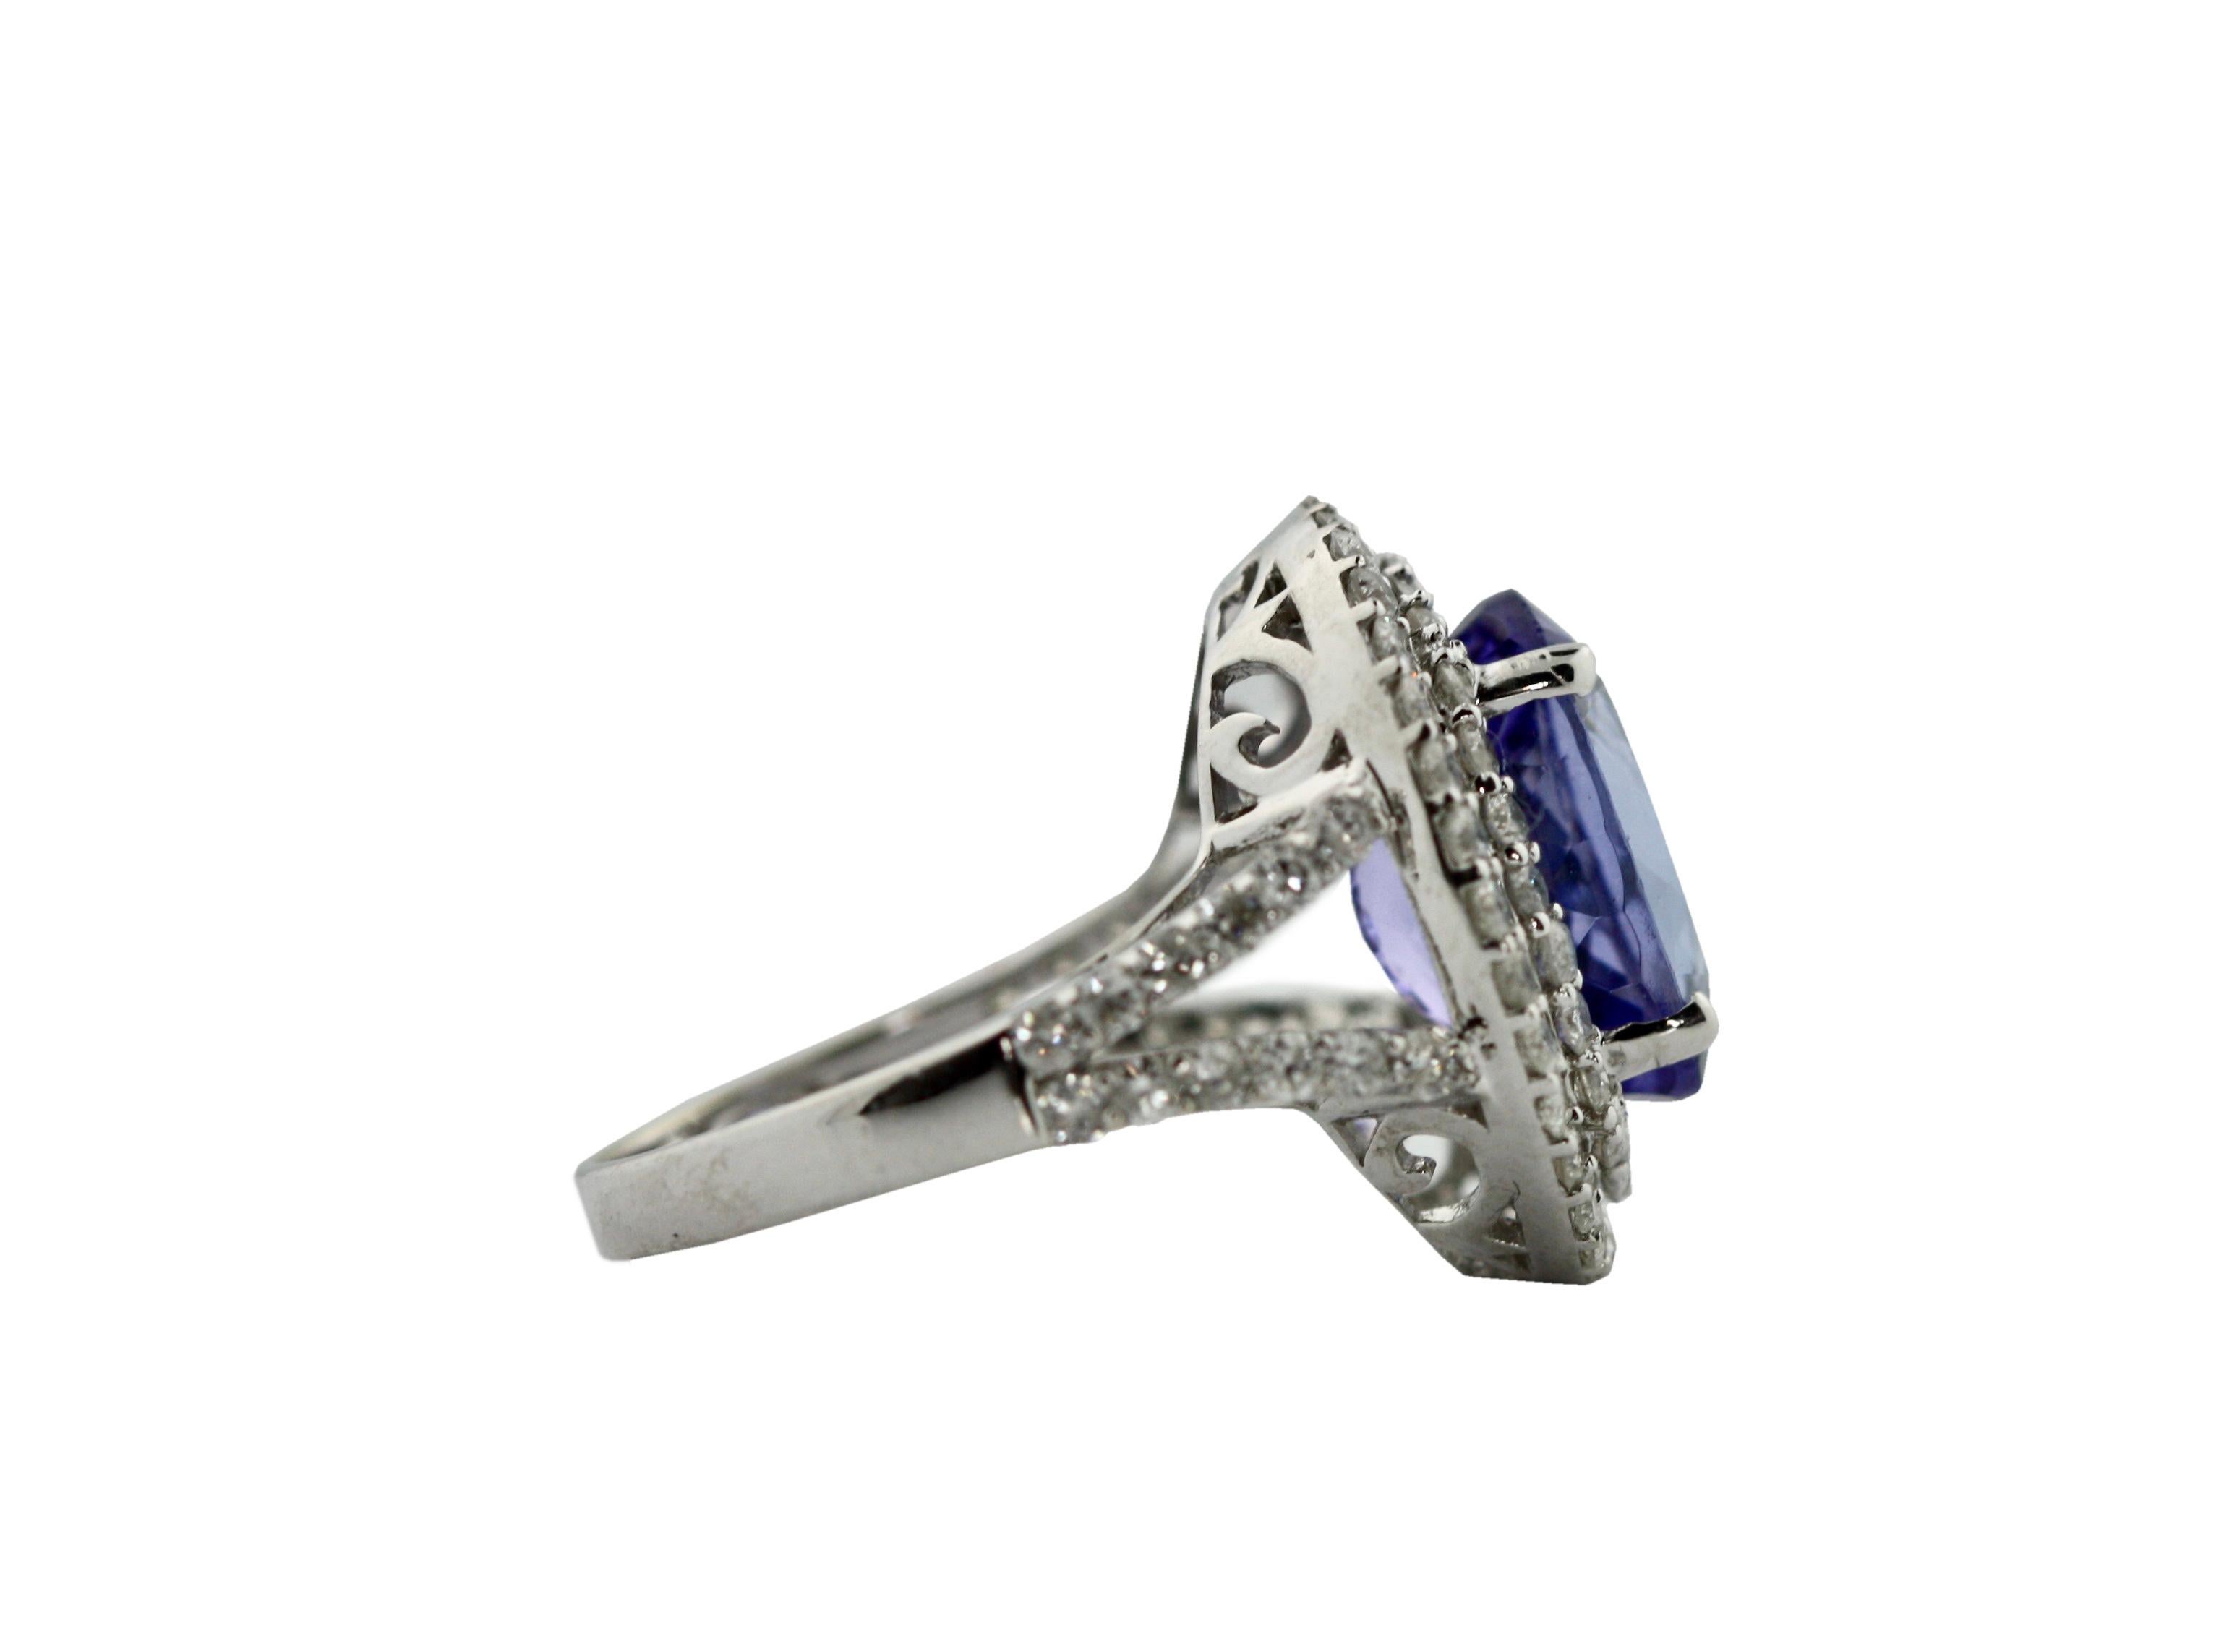 
Tanzanite and Diamond Ring 
mounted in 14kt white gold, size 7
Accompanied by AIGL Appraisal K45E11-EA13275 
Stating: 
14K Gold Tanzanite and Diamond Ring One polished, stamped, and tested 14K white gold ring with a bright finish, mounted with 1